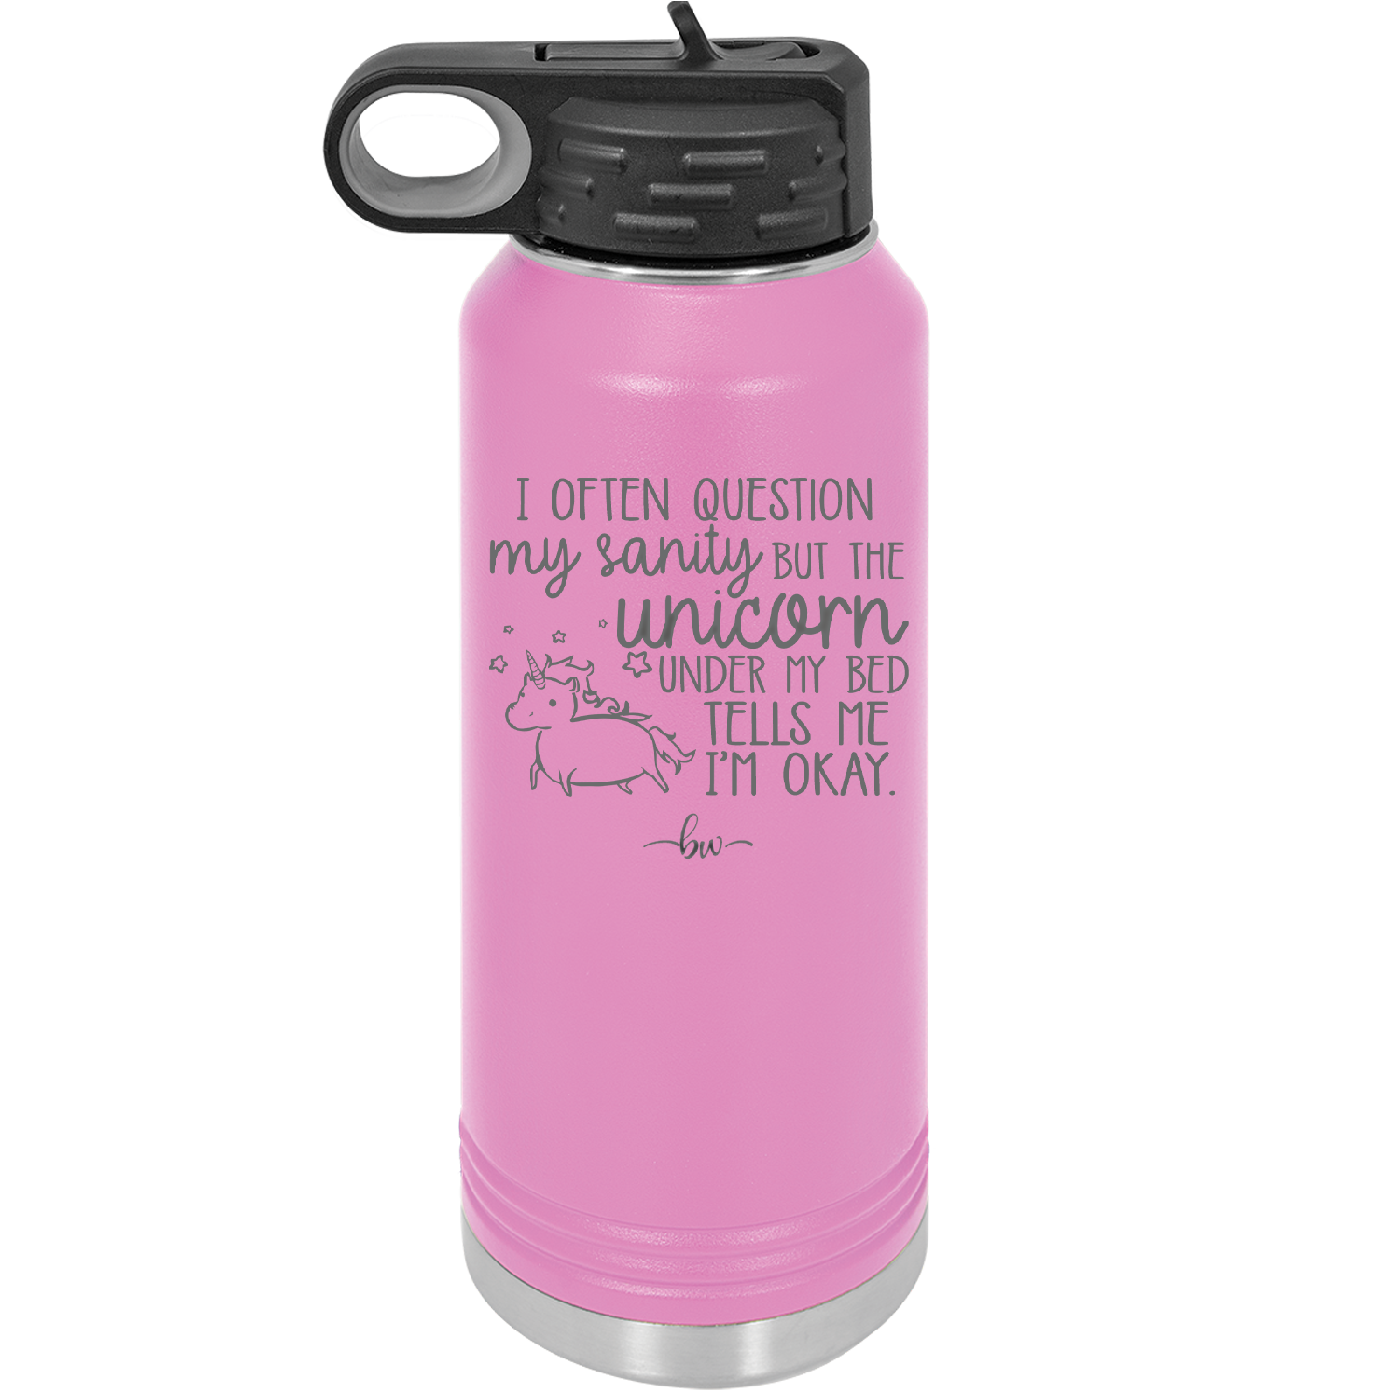 I Often Question My Sanity but the Unicorn Under My Bed Says I'm Okay - Laser Engraved Stainless Steel Drinkware - 2400 -